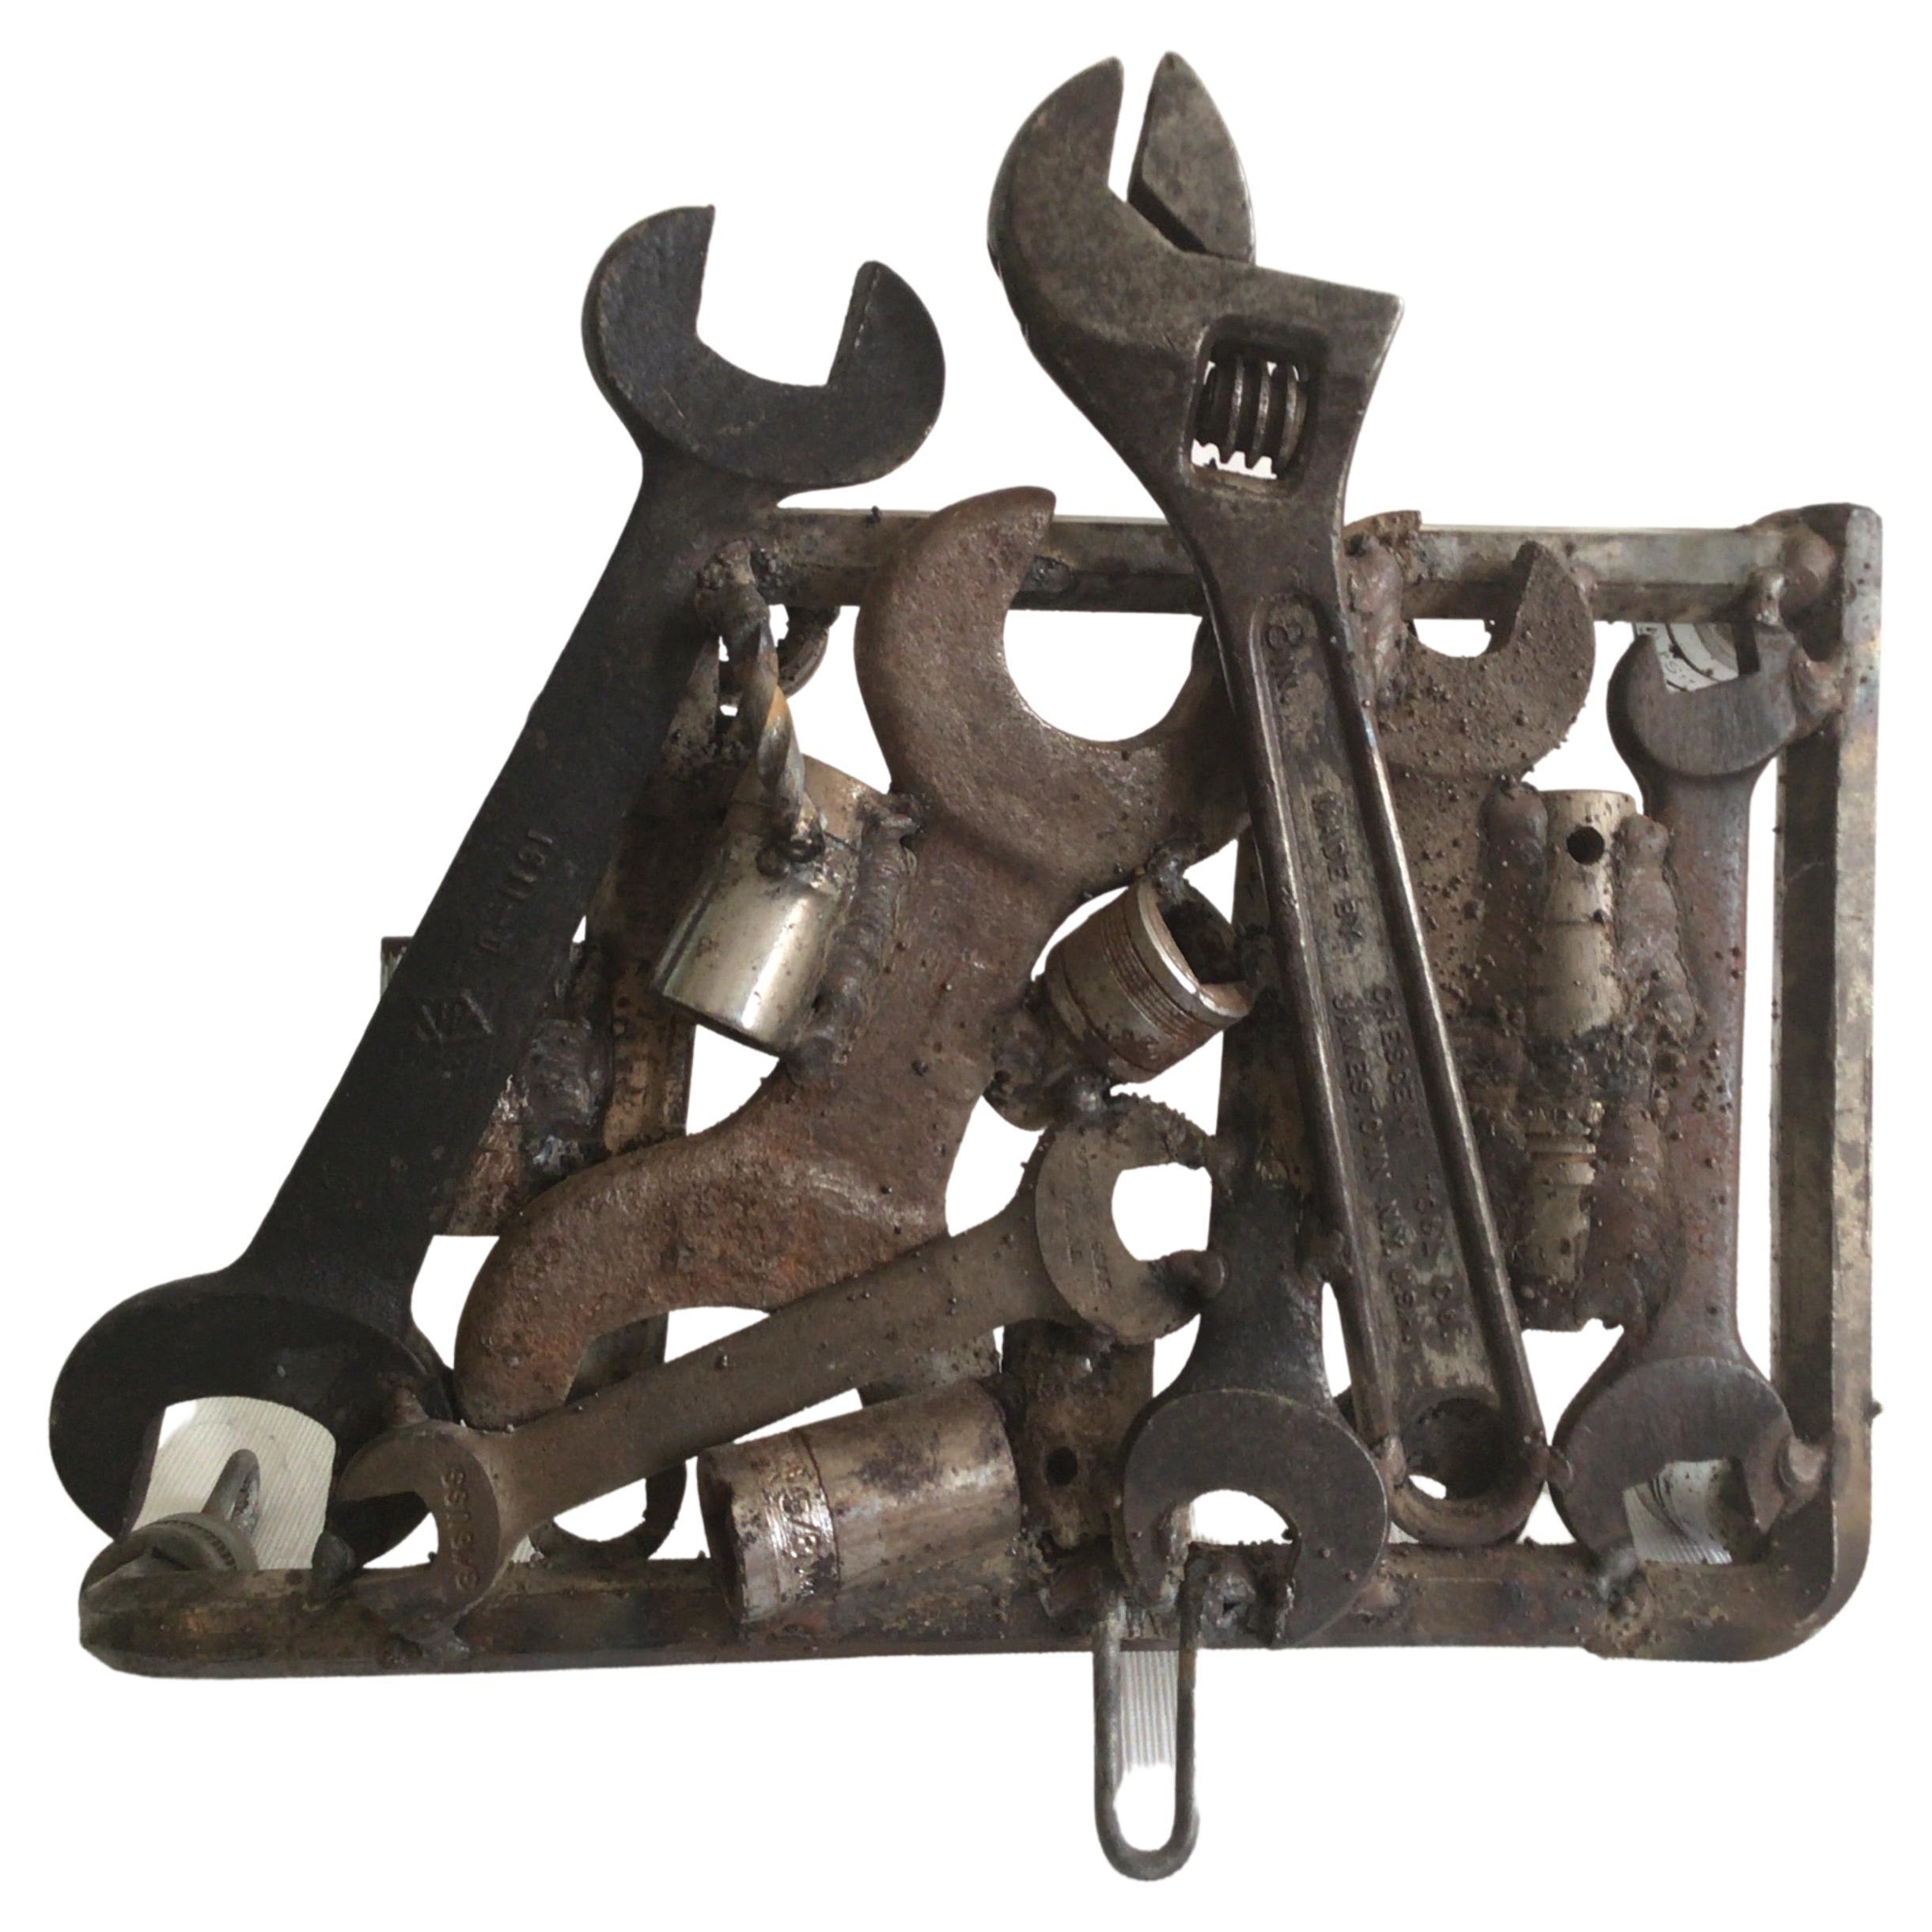 1970s Industrial Wrench Sculpture